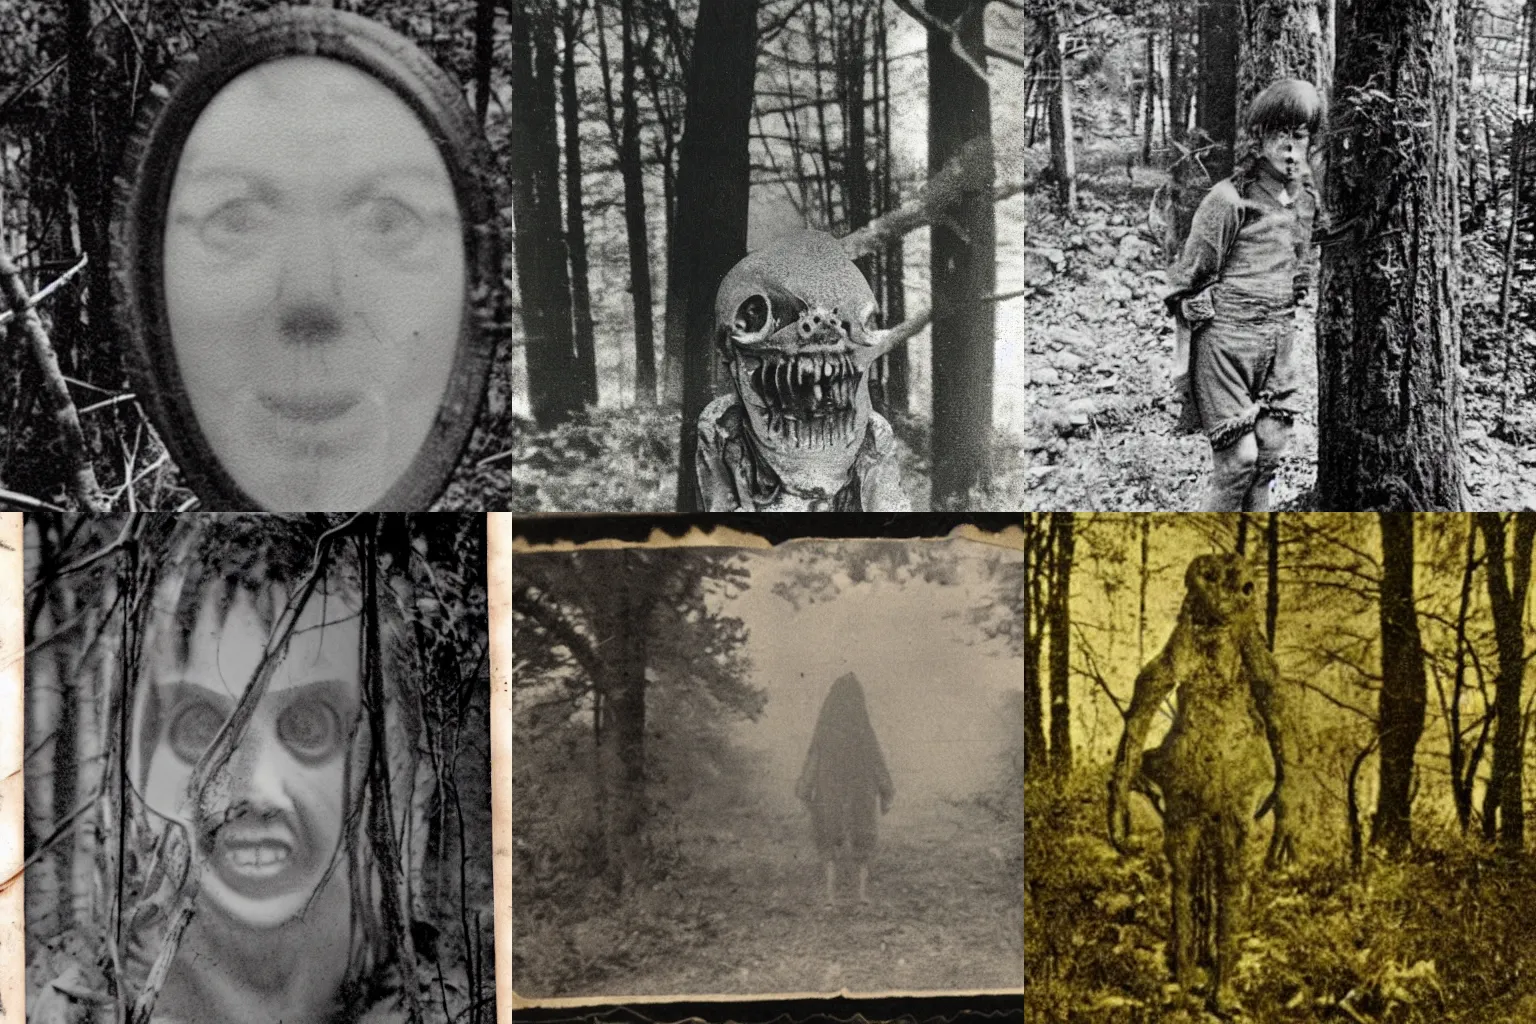 Prompt: a worn old photograph of a horrific creature in the woods, found footage, creepy